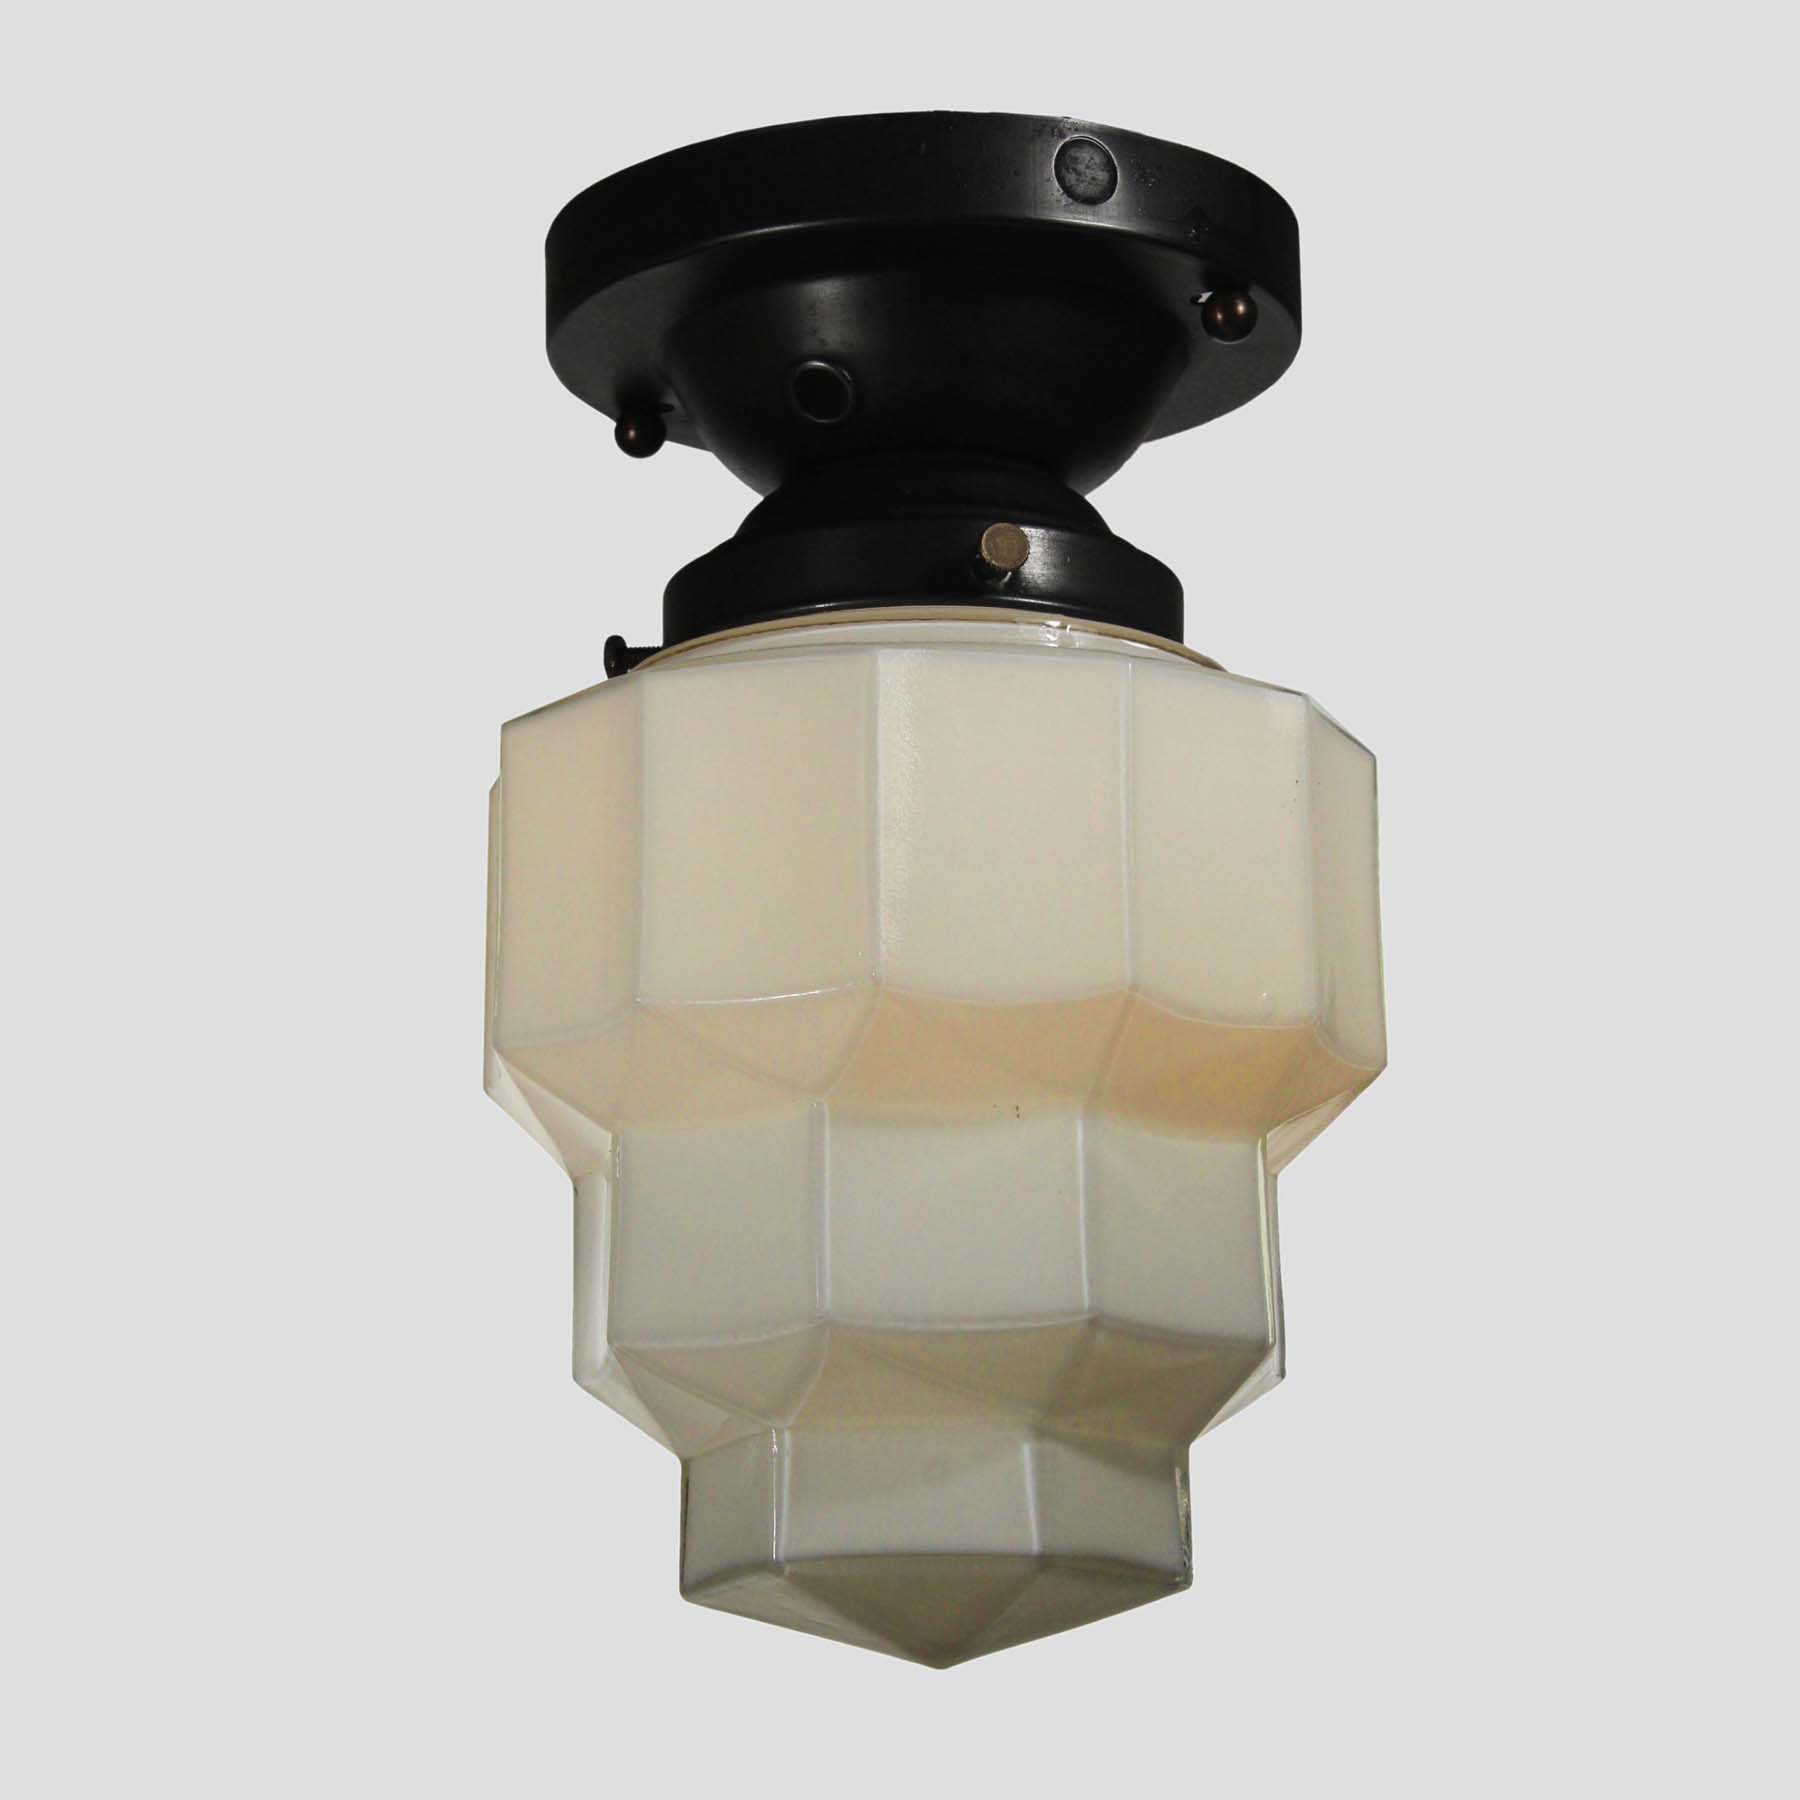 SOLD Art Deco Flush Mount with Flash Glass Shade, Antique Lighting-66975